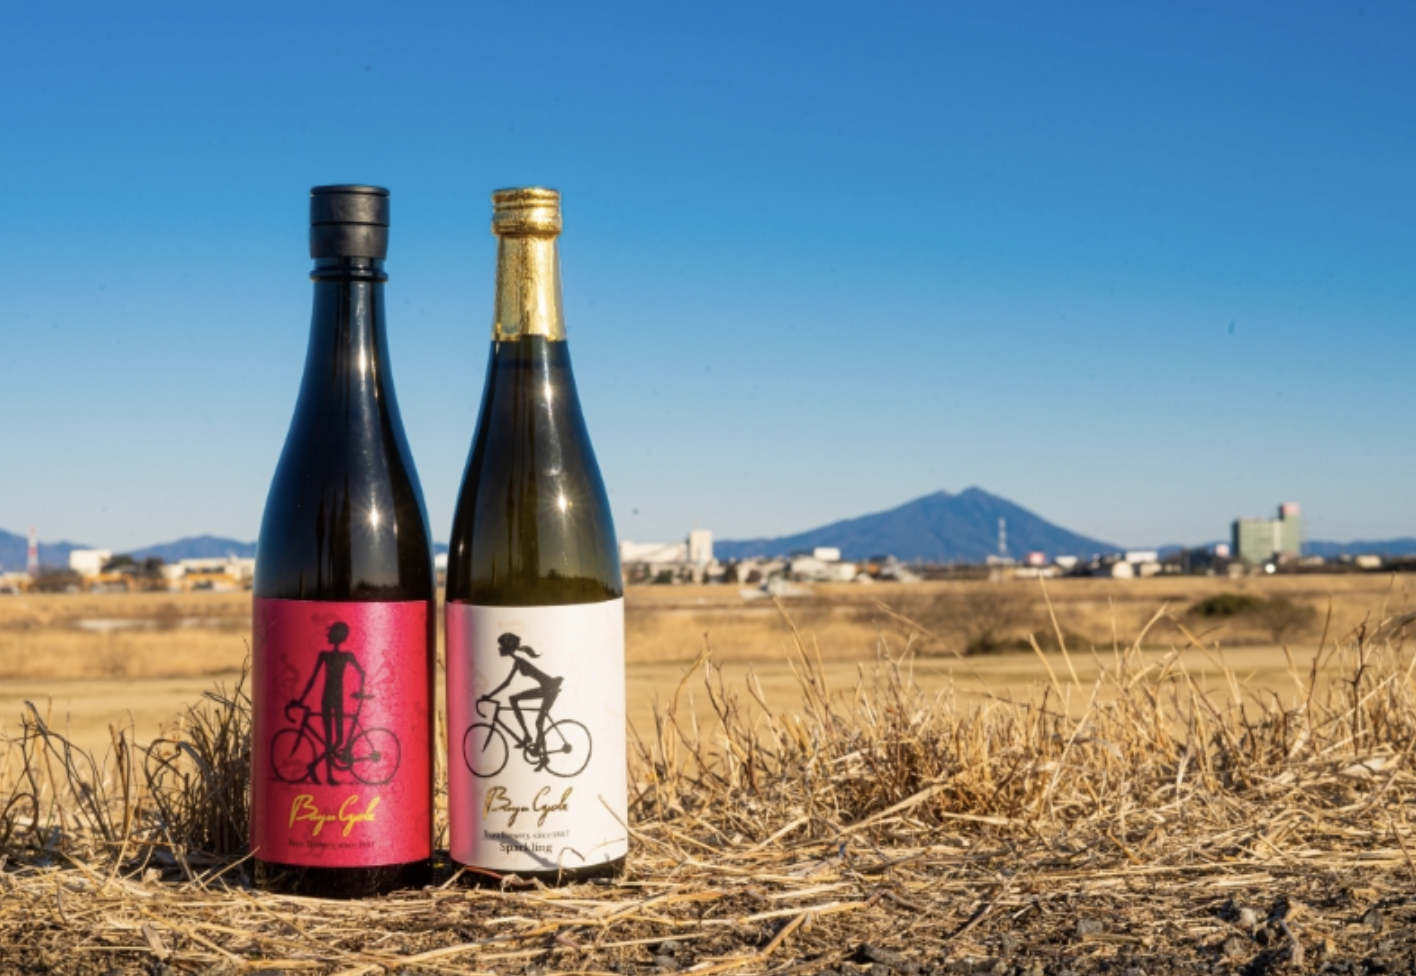 Our affiliate creator Kitaro Kosaka designed the “Buyu Cycle” label for the Buyu brewery, which celebrates a history of 170 years in the Japanese sake business.